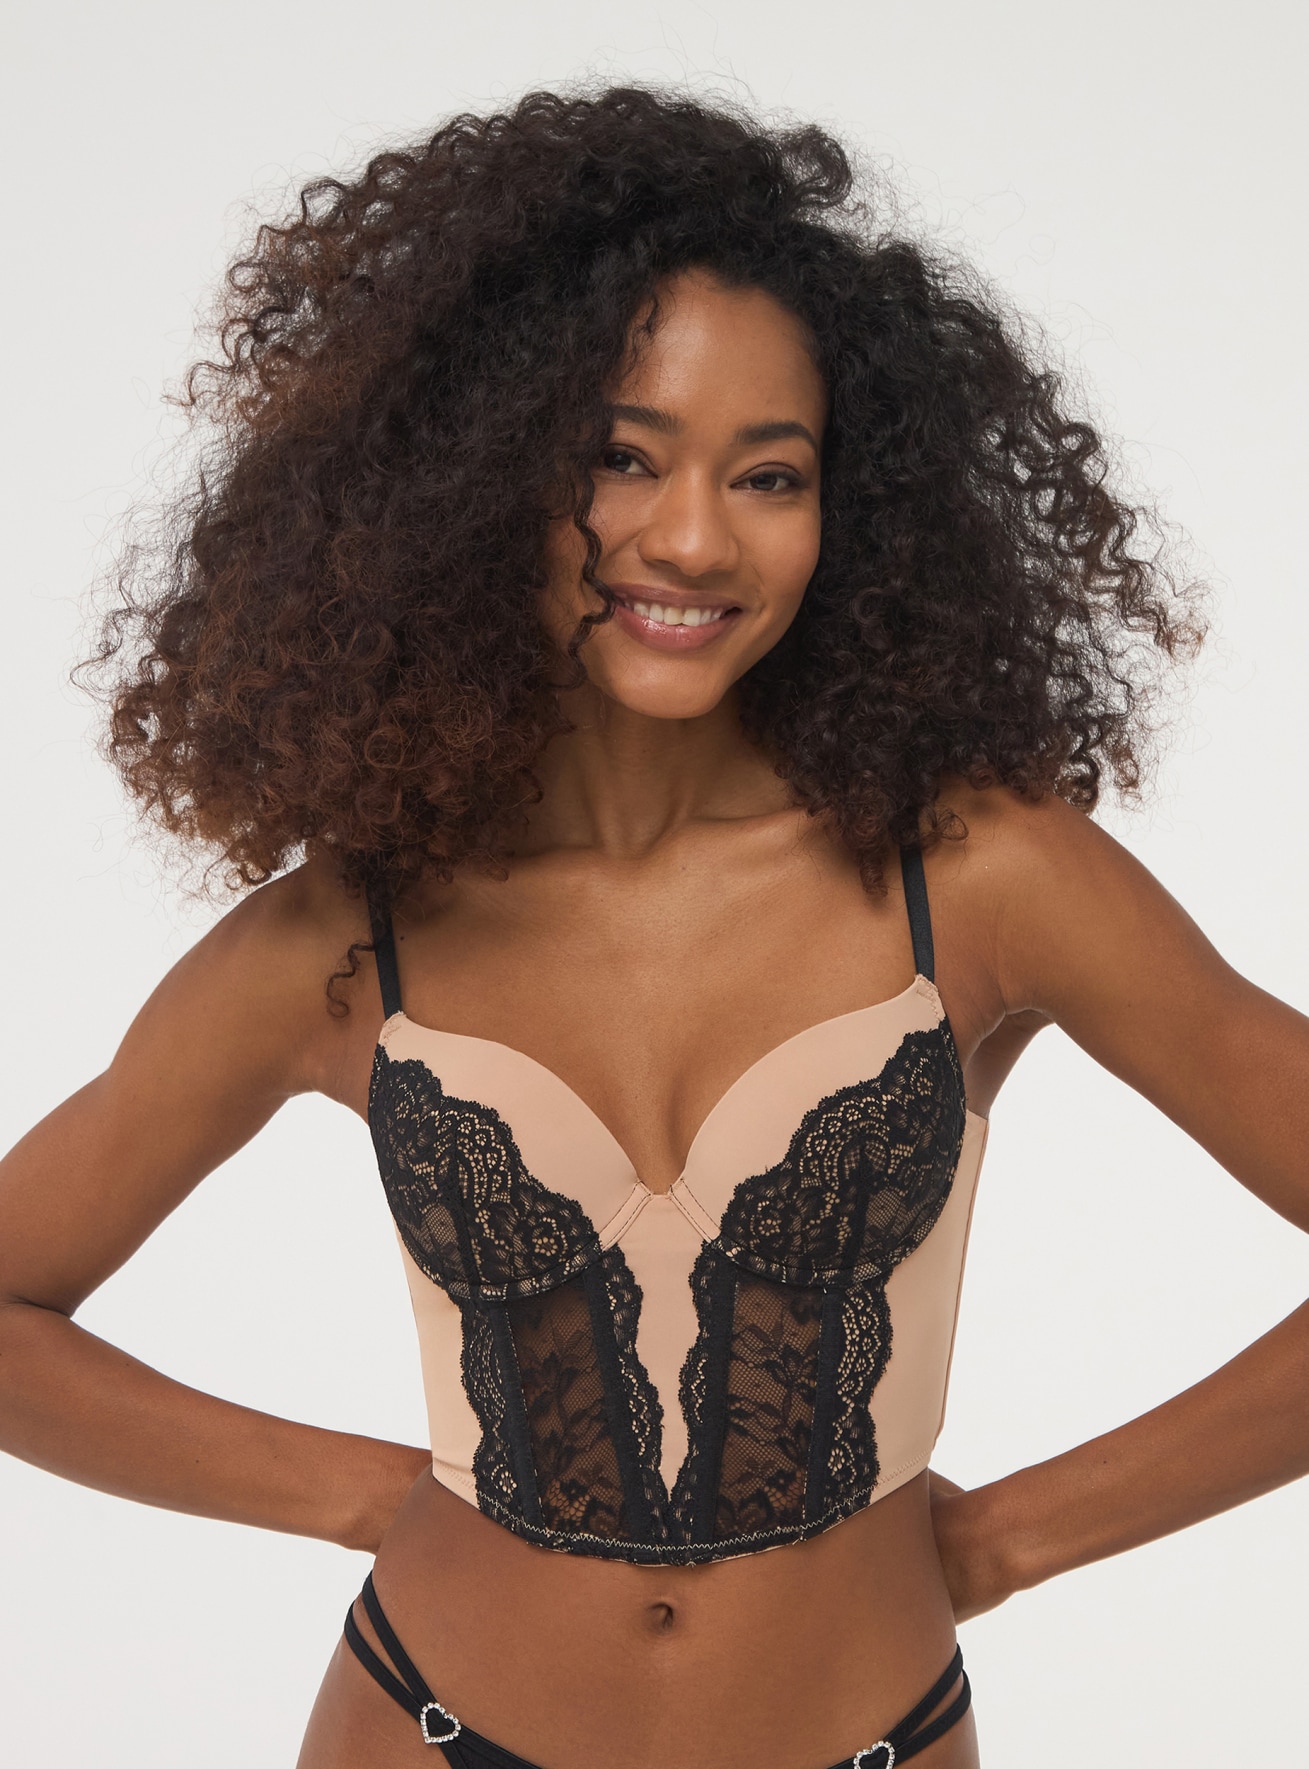 Nude Bustier with lace balcony bra - Buy Online